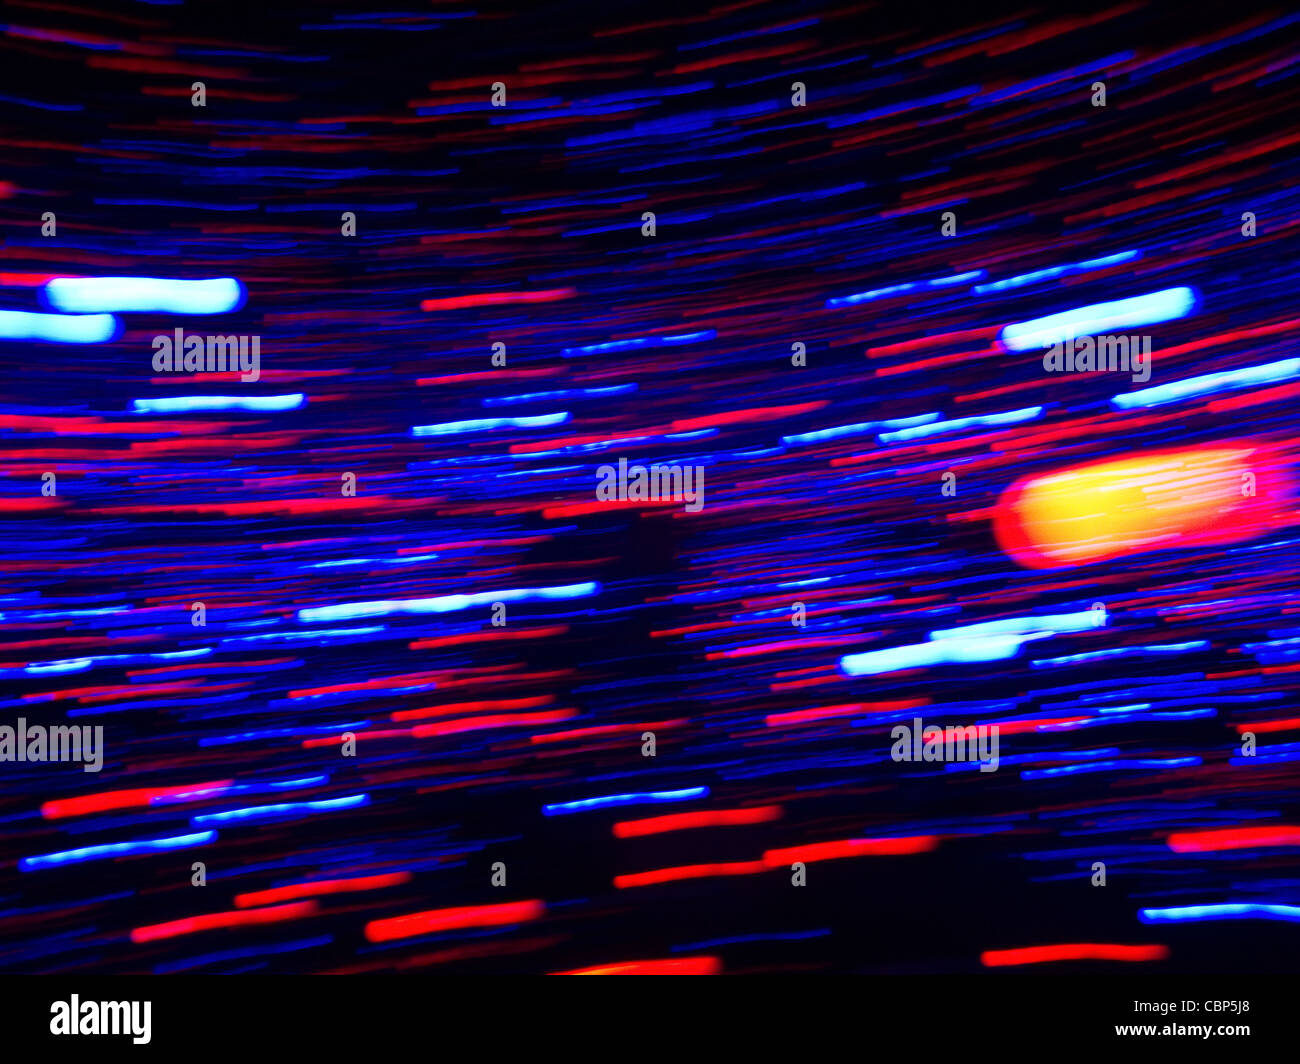 Abstract light pattern red and blue with motion blur Stock Photo